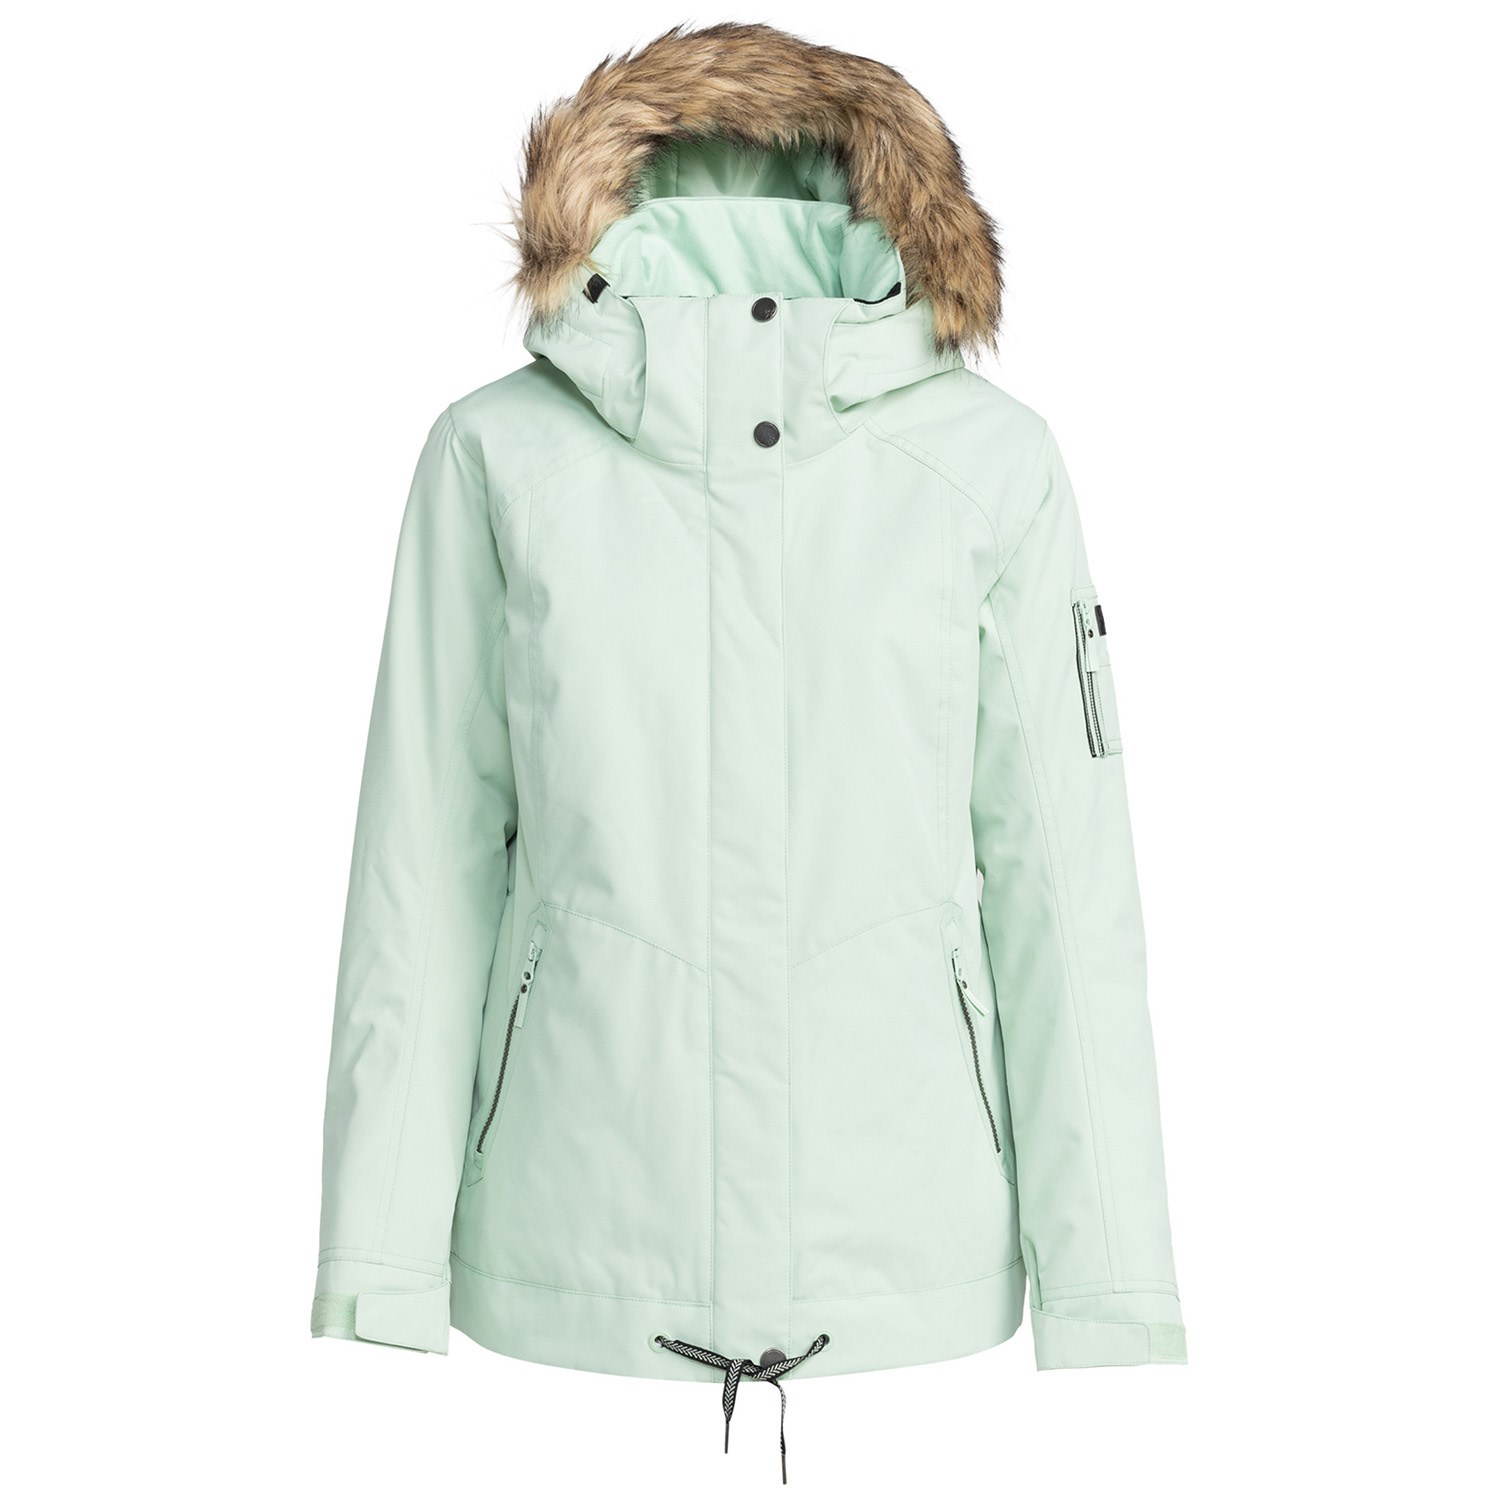  Roxy Women's Shelter Snow Jacket with DryFlight Technology,  Cameo Green, X-Small : Clothing, Shoes & Jewelry